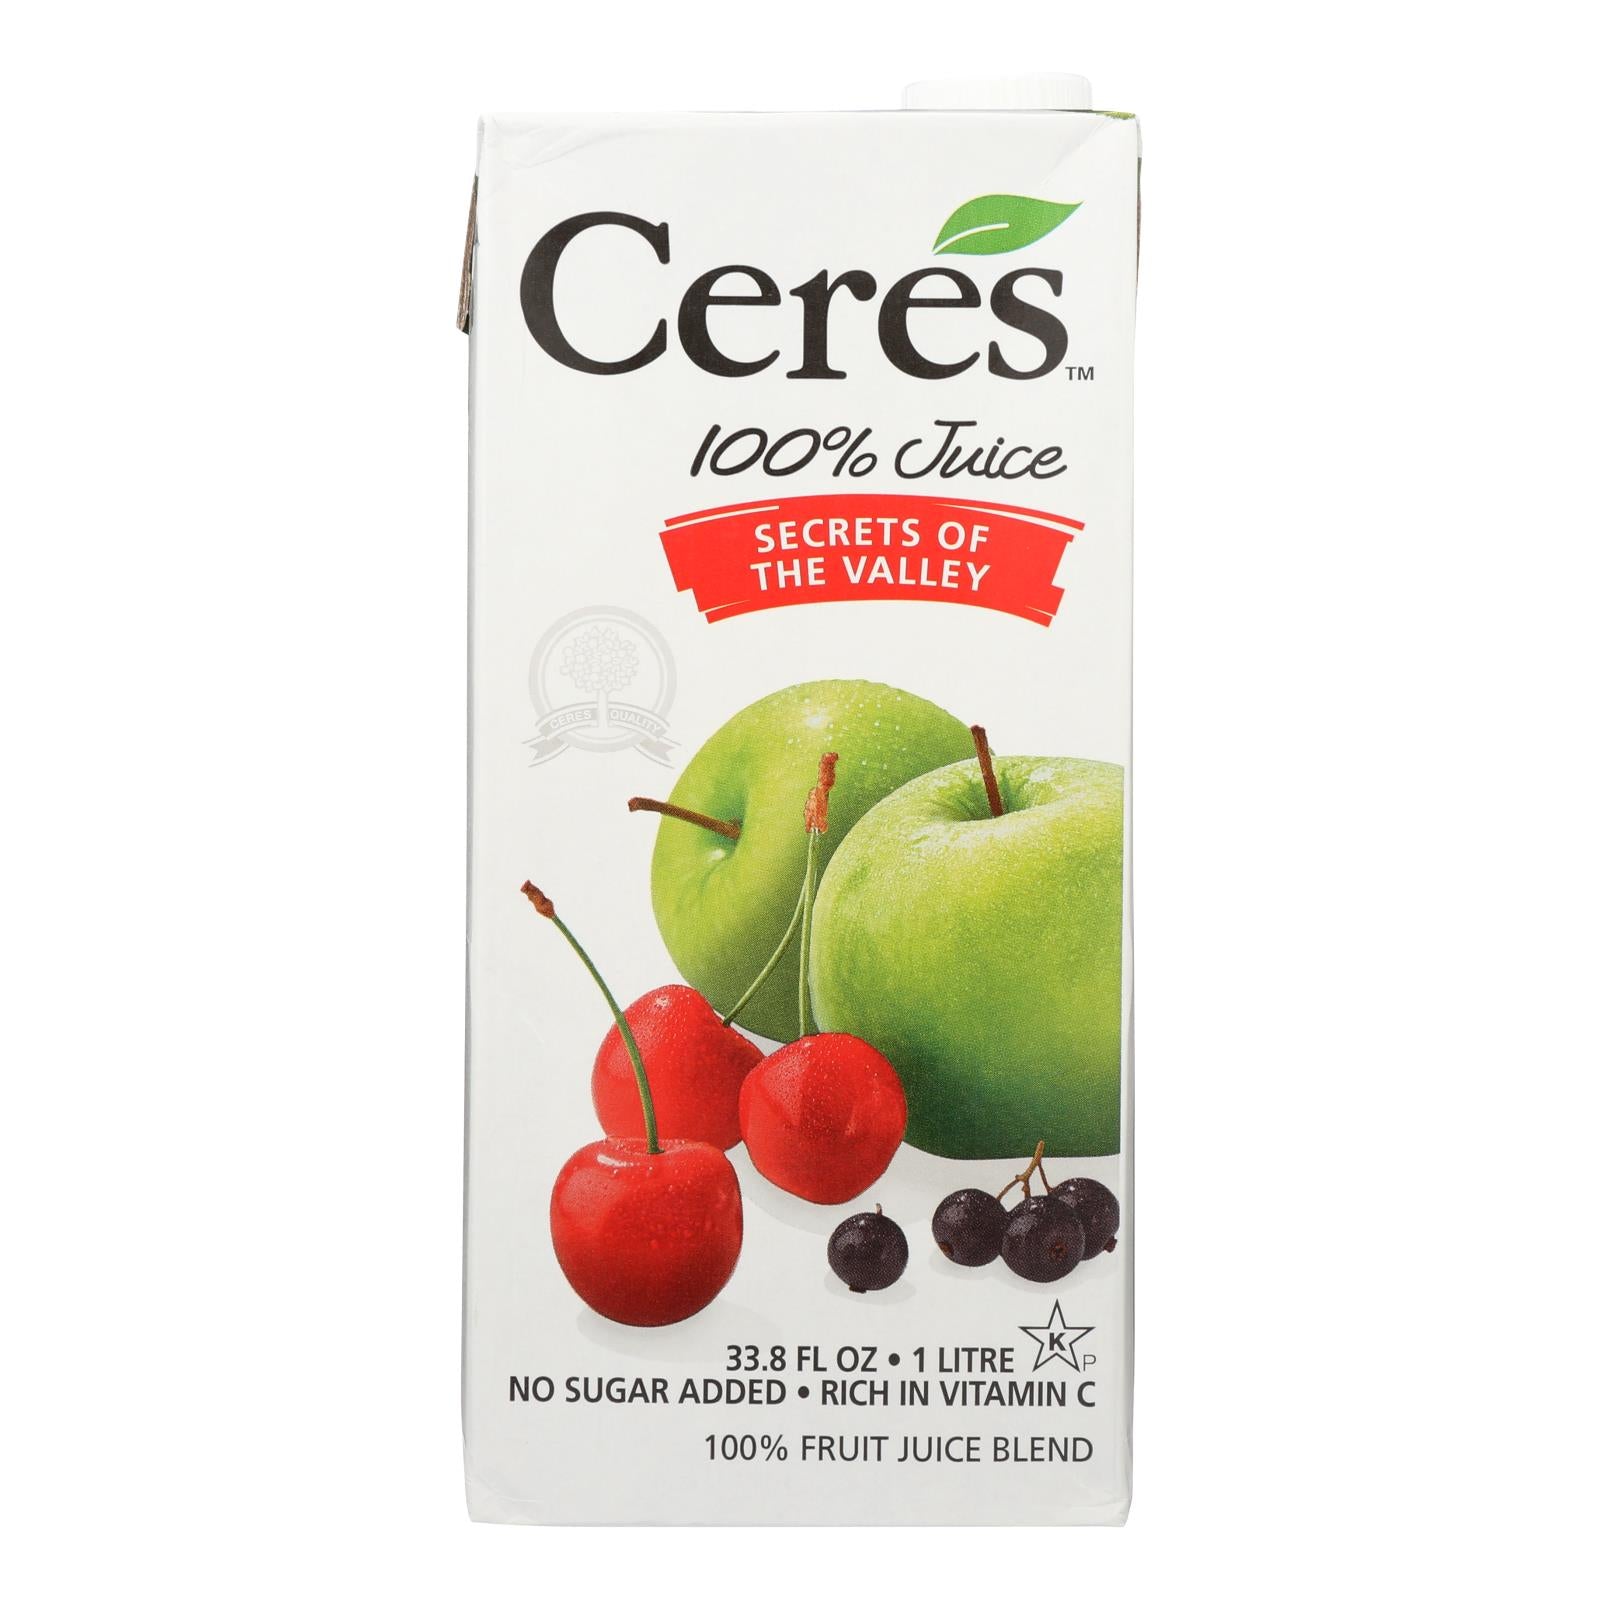 Ceres, Ceres 100% Pears Apples Cherries And Black Currant Juice  - Case of 12 - 33.8 FZ (Pack of 12)